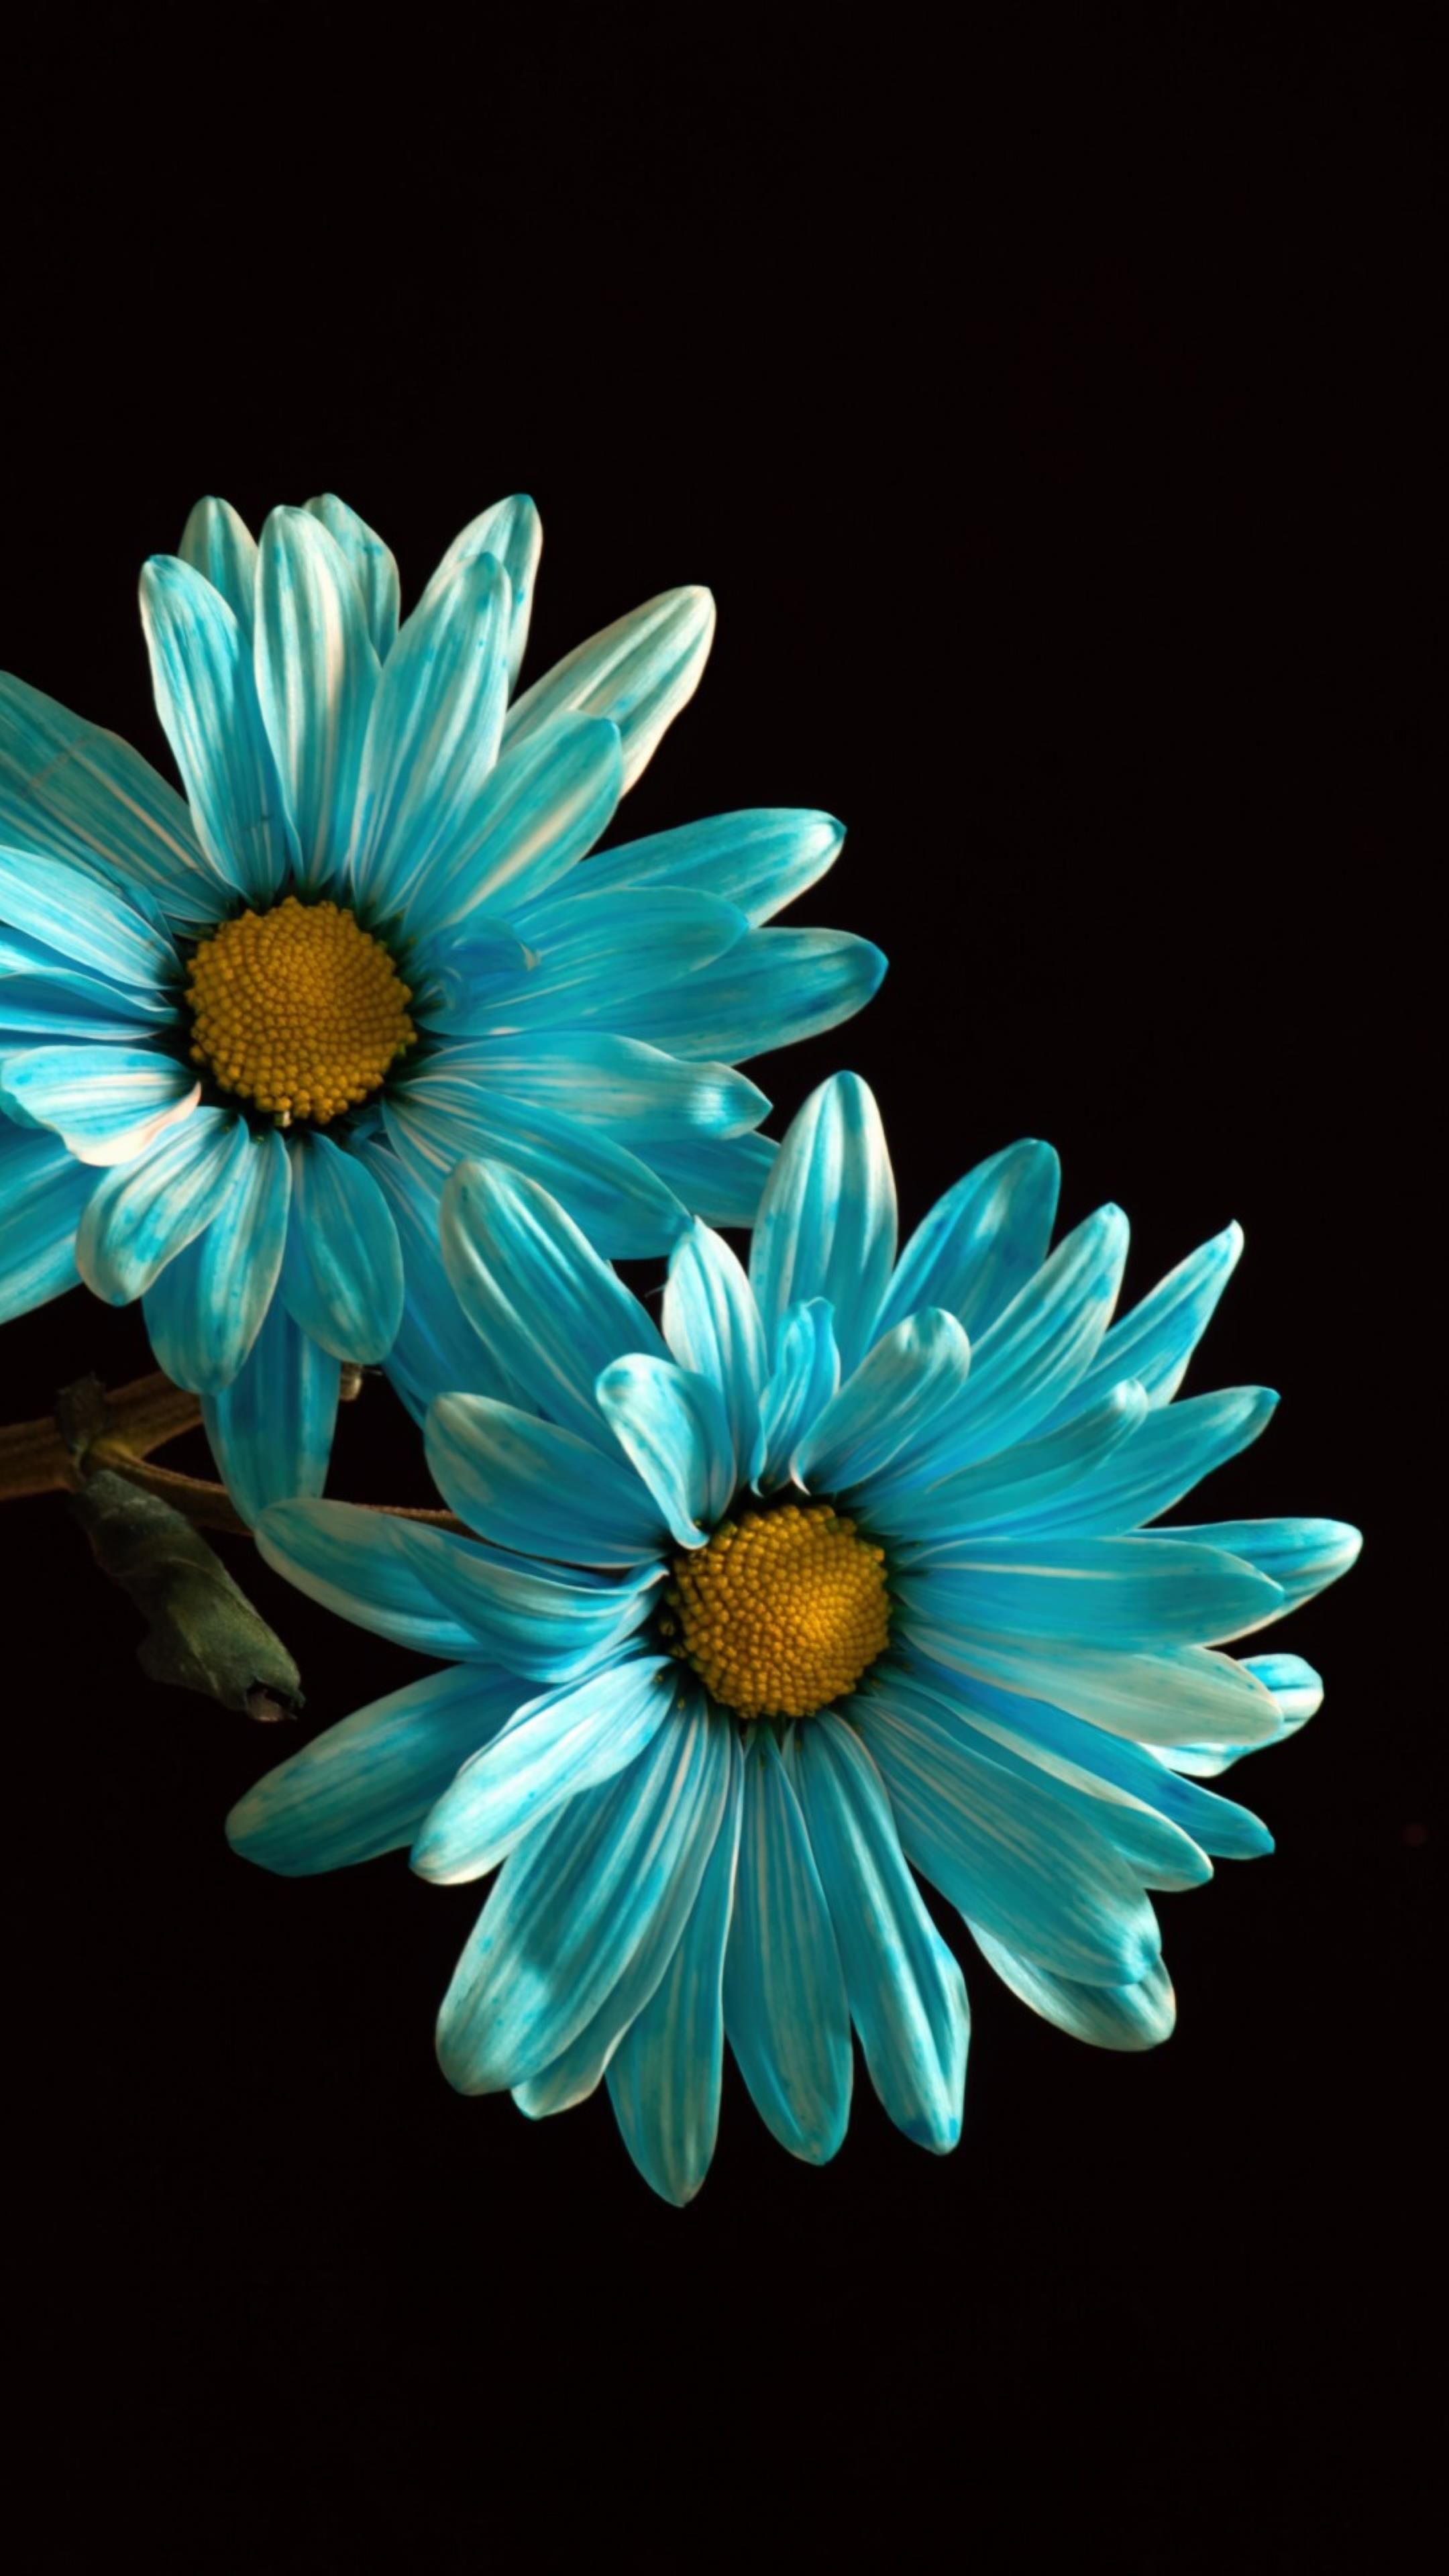 Amoled Flower Wallpapers - Wallpaper Cave